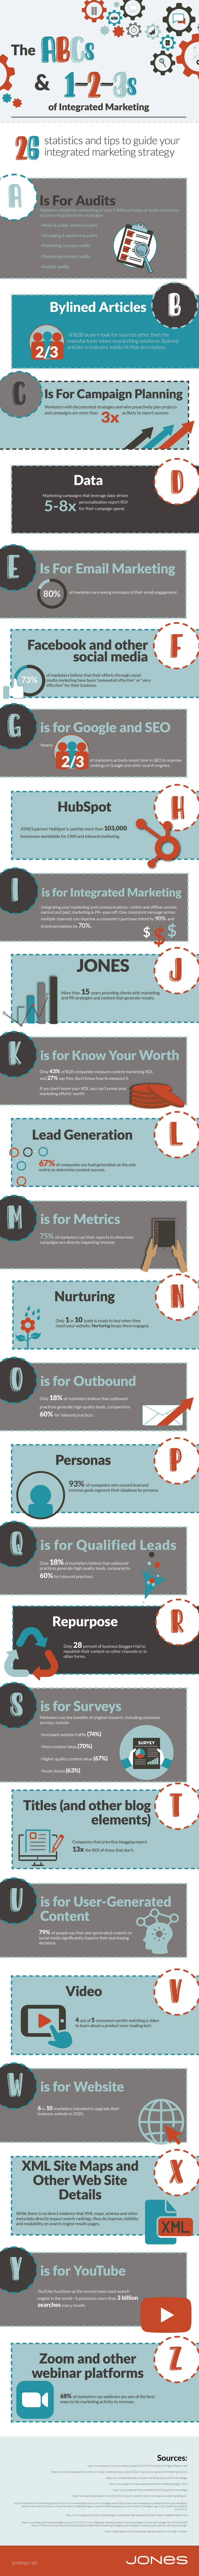 Jones_may2021_infographic_abcs_123s_integrated_marketing